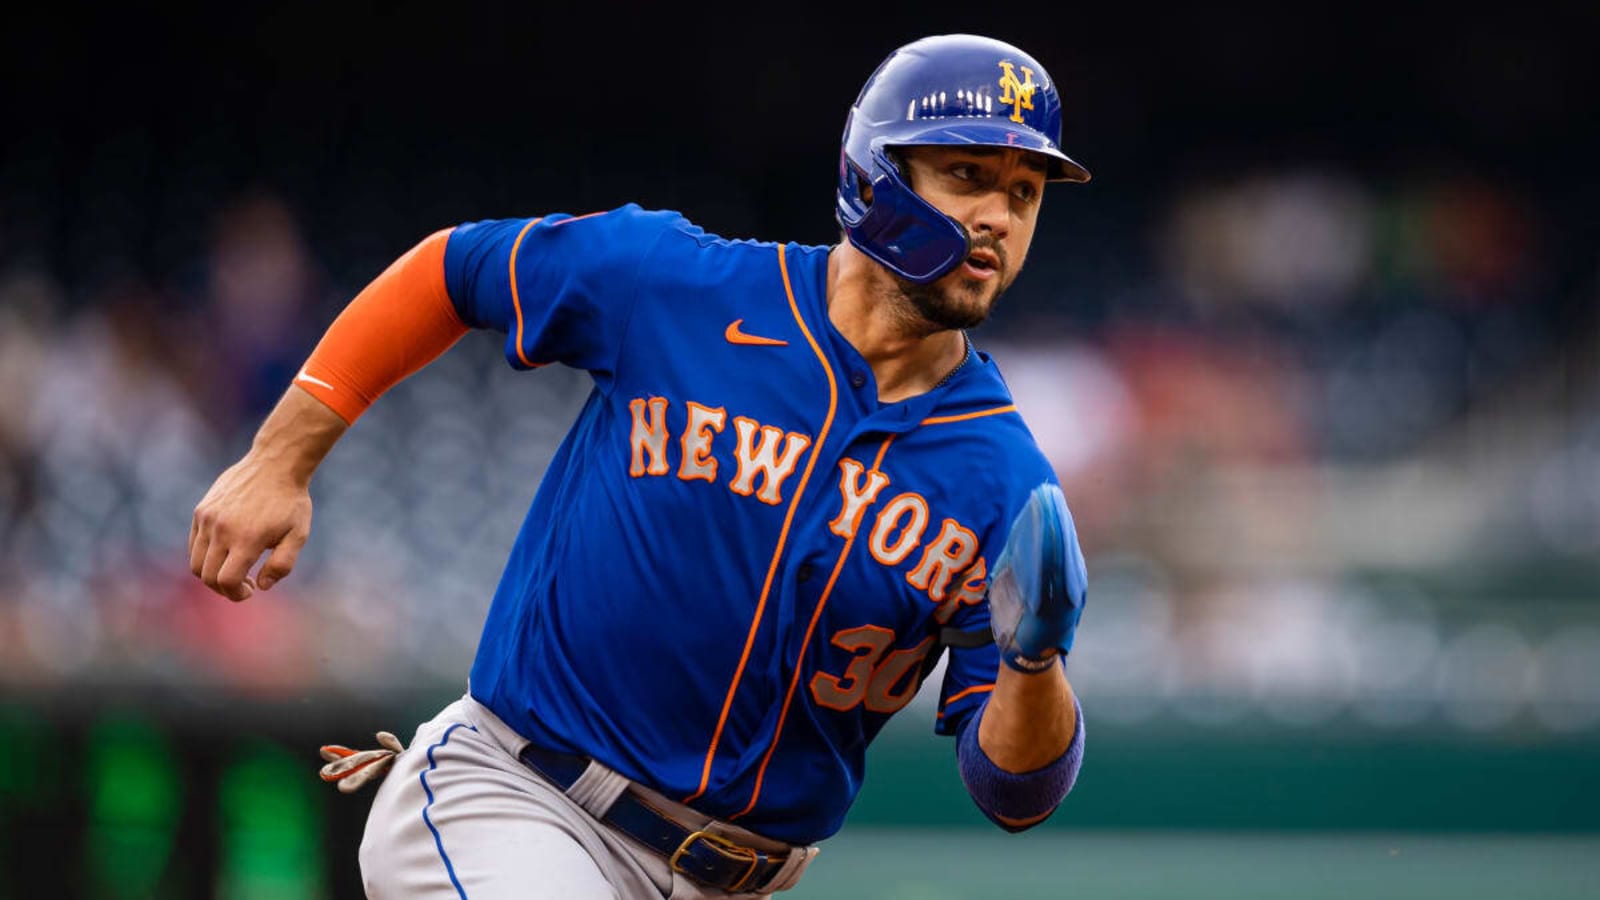 Sources: Houston Astros Offered Michael Conforto Multi-Year Deal